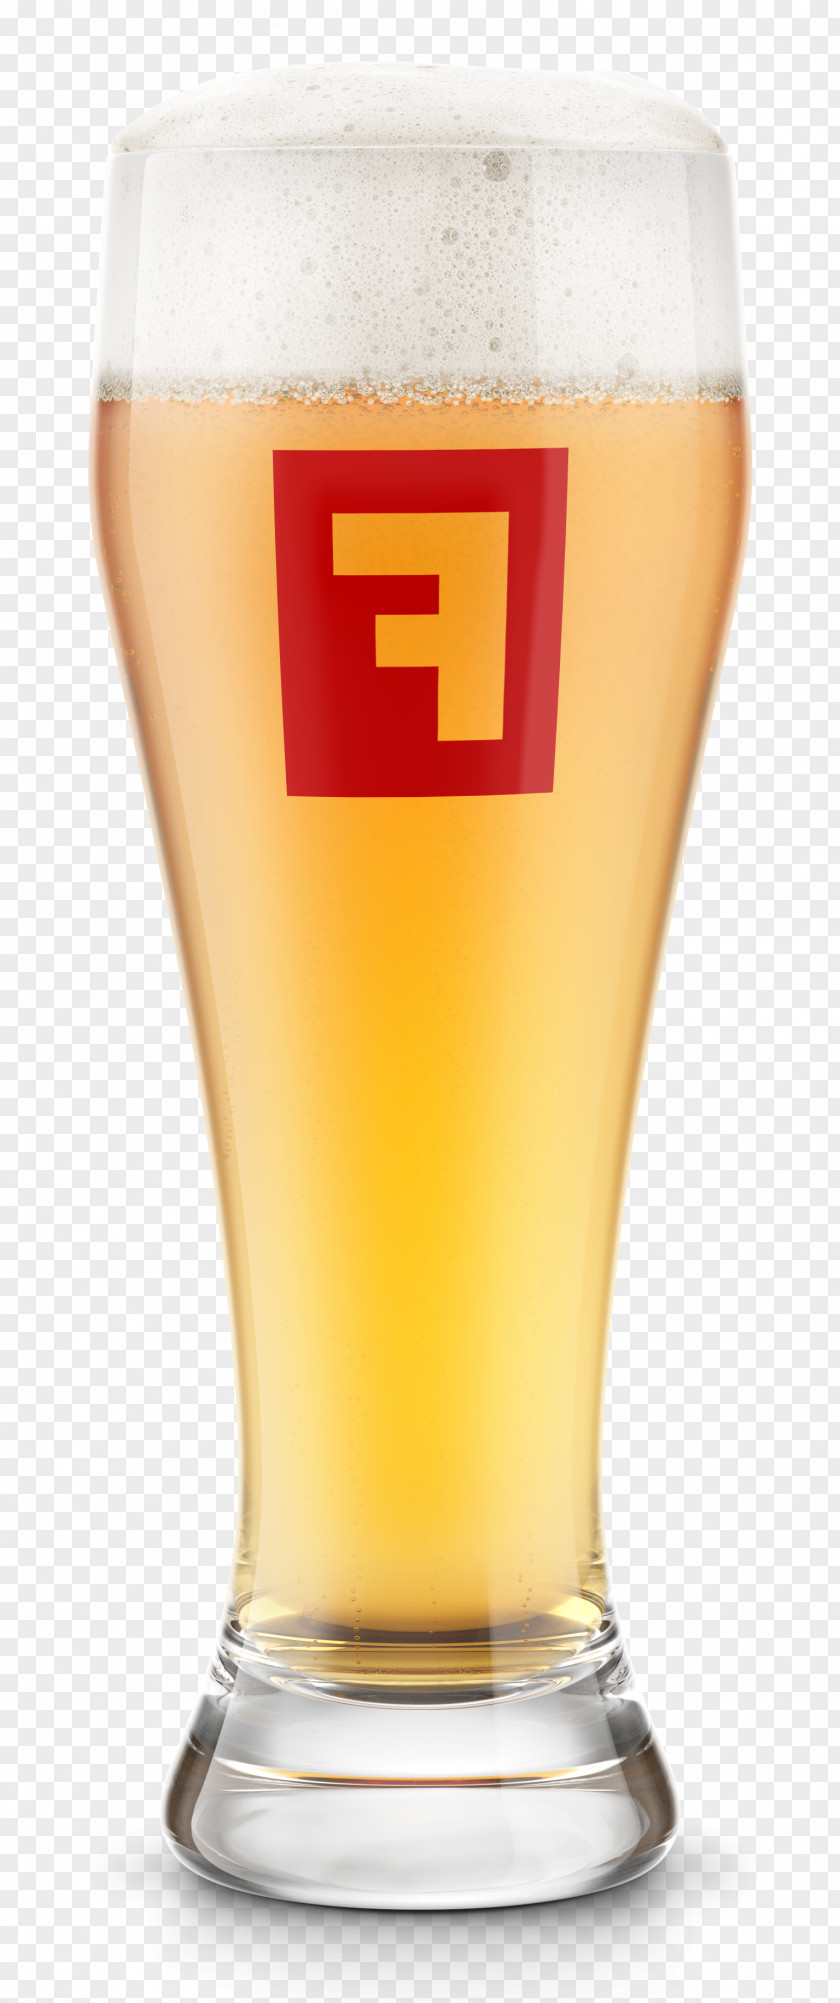 Beer Cocktail Fullsteam Brewery Pint Glass Wheat PNG